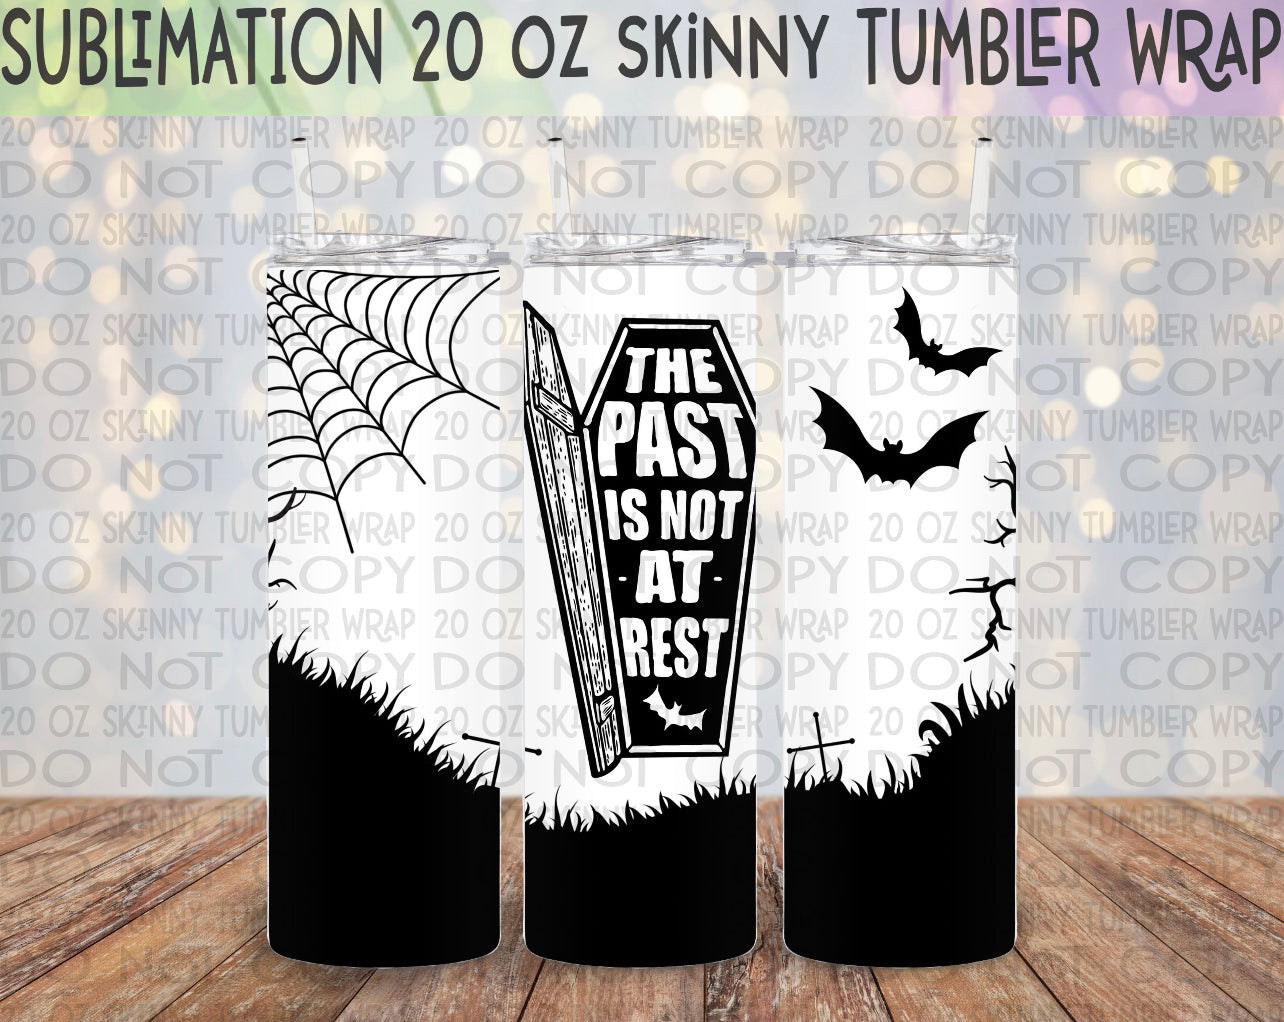 The Past is not at Rest 20 Oz Skinny Tumbler Wrap - Sublimation Transfer - RTS